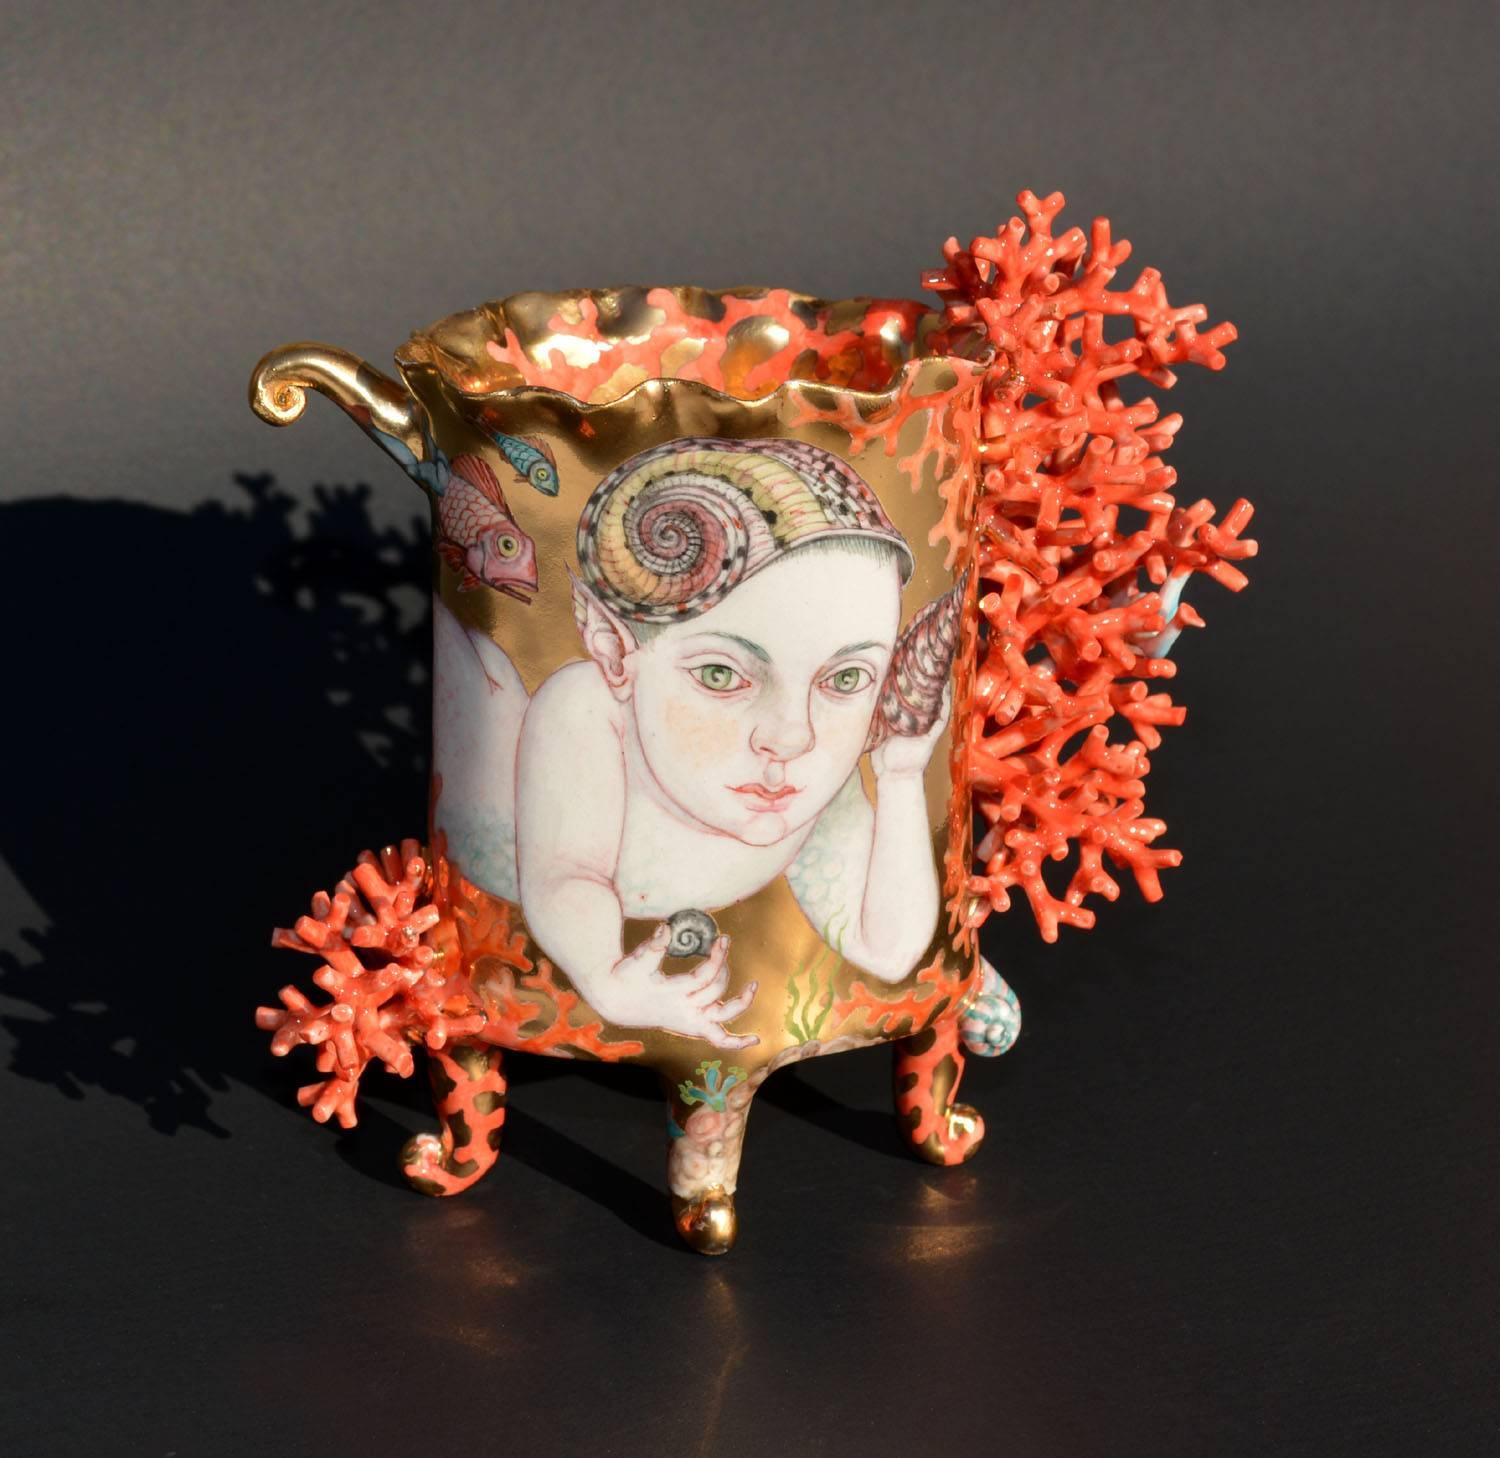 This remarkable piece by Irina Zaytceva features a beautiful gold luster glaze and hand painted illustration.  Irina's work is known for its incredible level of detail in both 2D and sculptural accents. 

Contact us today to learn more about this